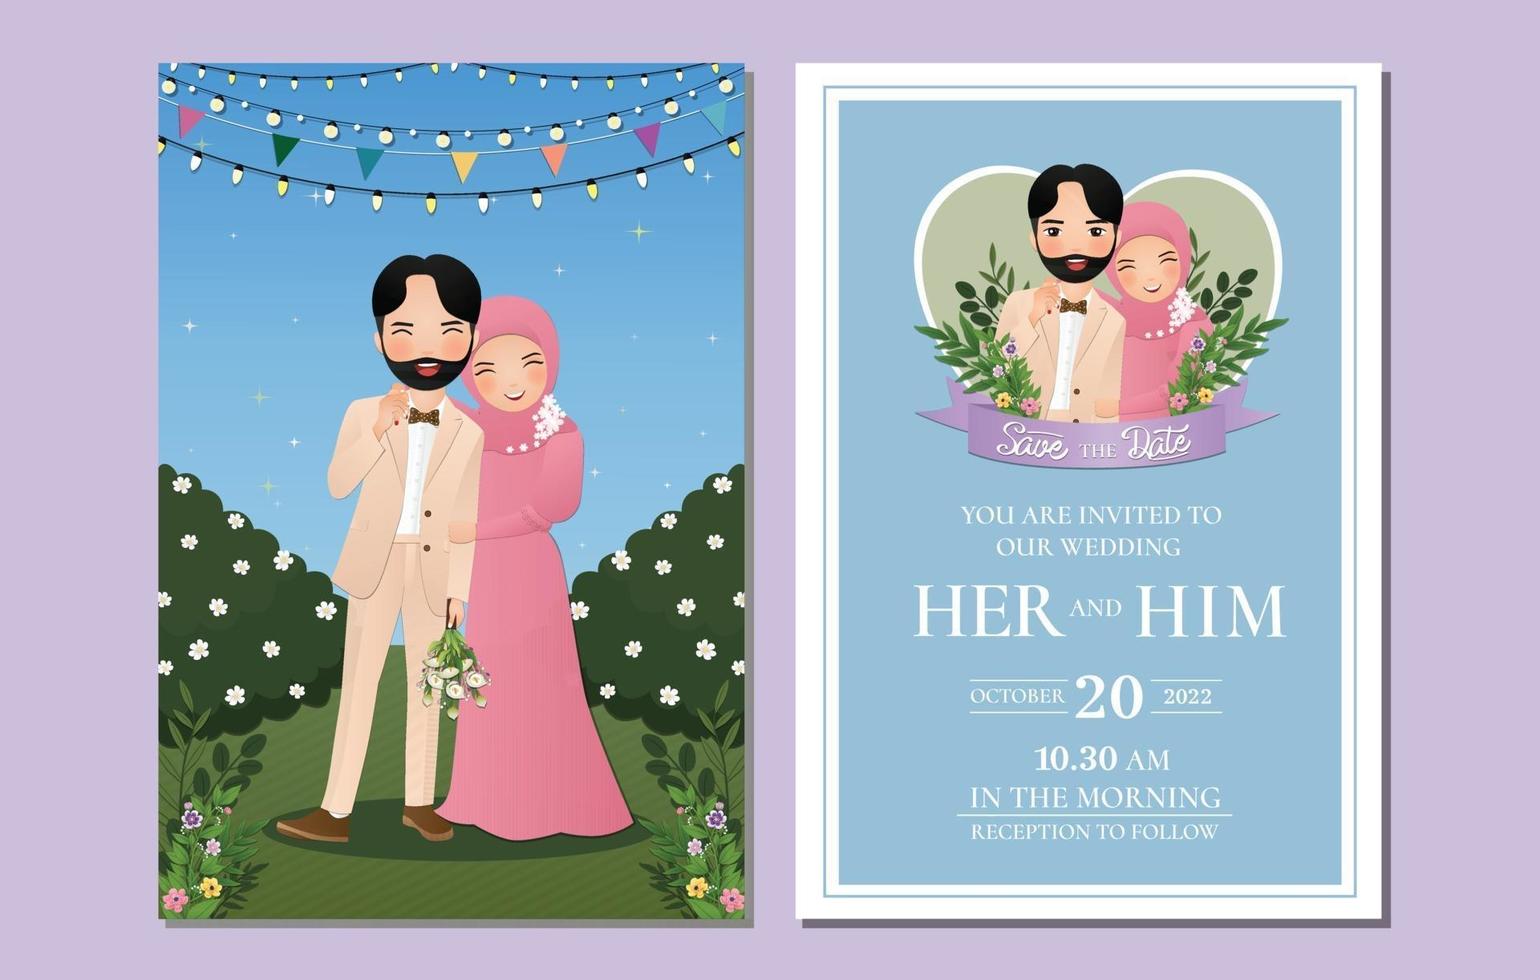 Wedding invitation card the bride and groom muslim couple cartoon embracing outdoors with Landscape beautiful flowers full blooming vector